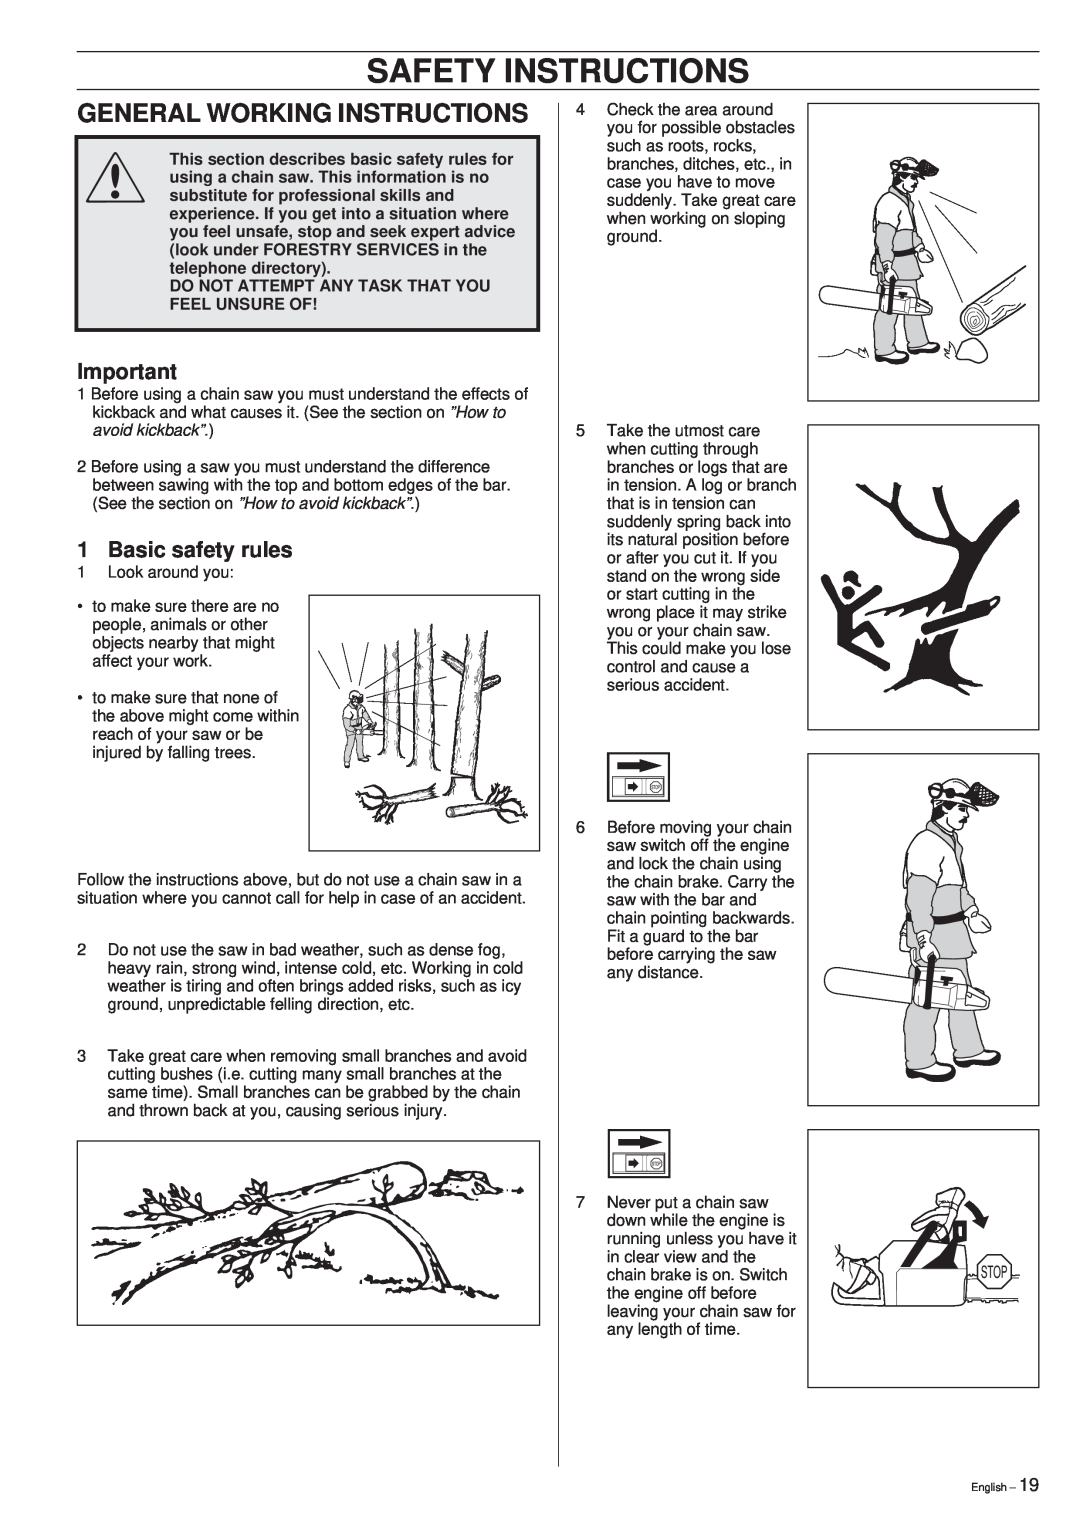 Husqvarna 261 manual Safety Instructions, General Working Instructions, Basic safety rules 